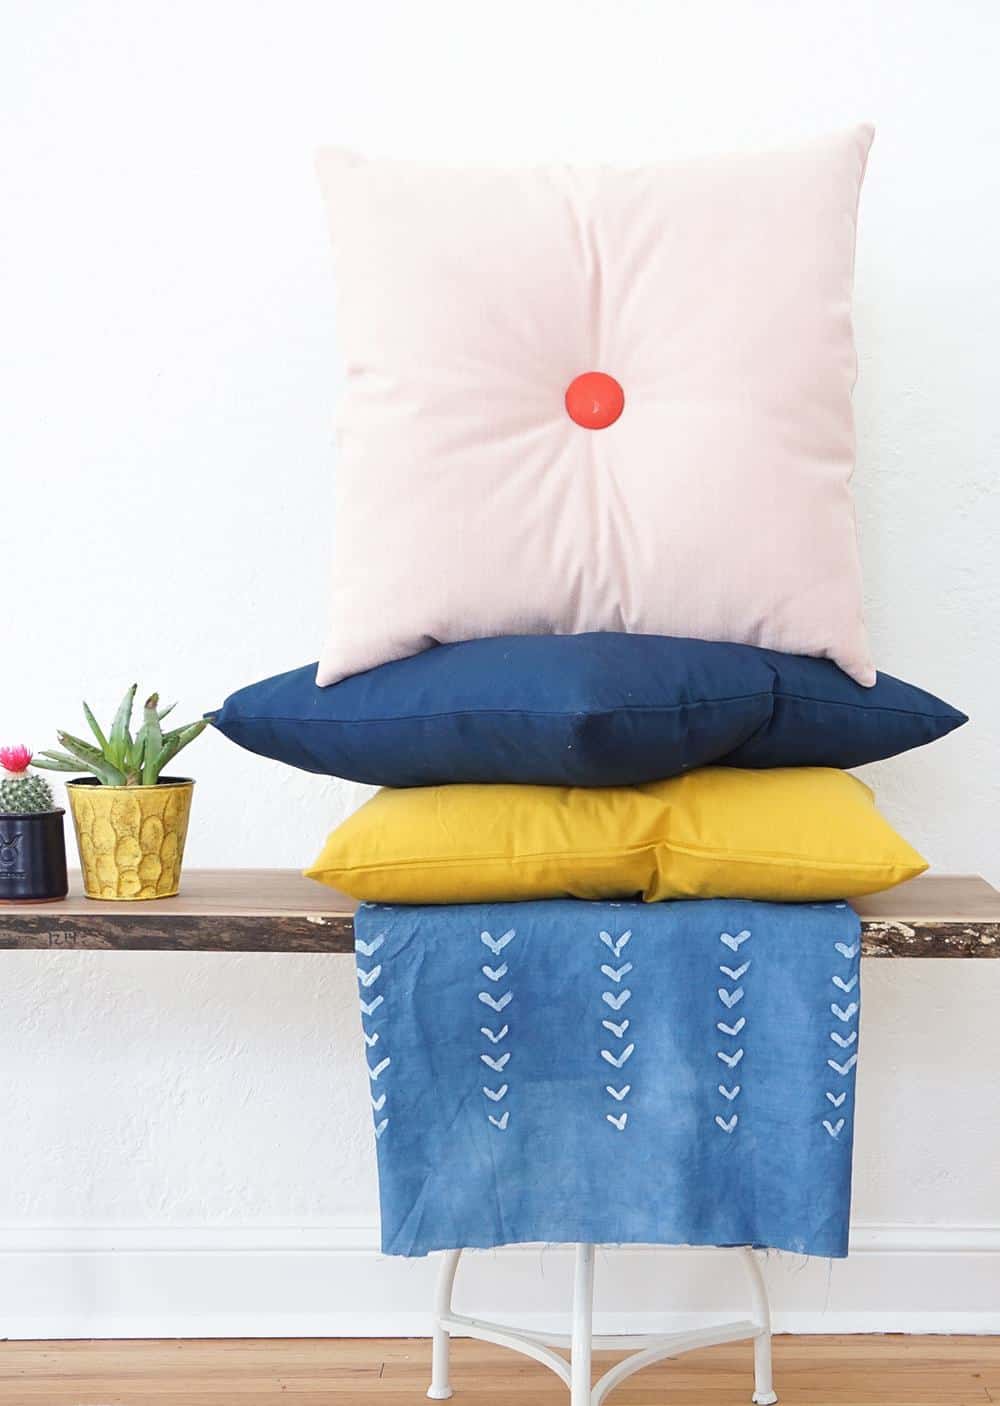 Colorful DIY tufted pillows - sugar and cloth - home decor - mid century